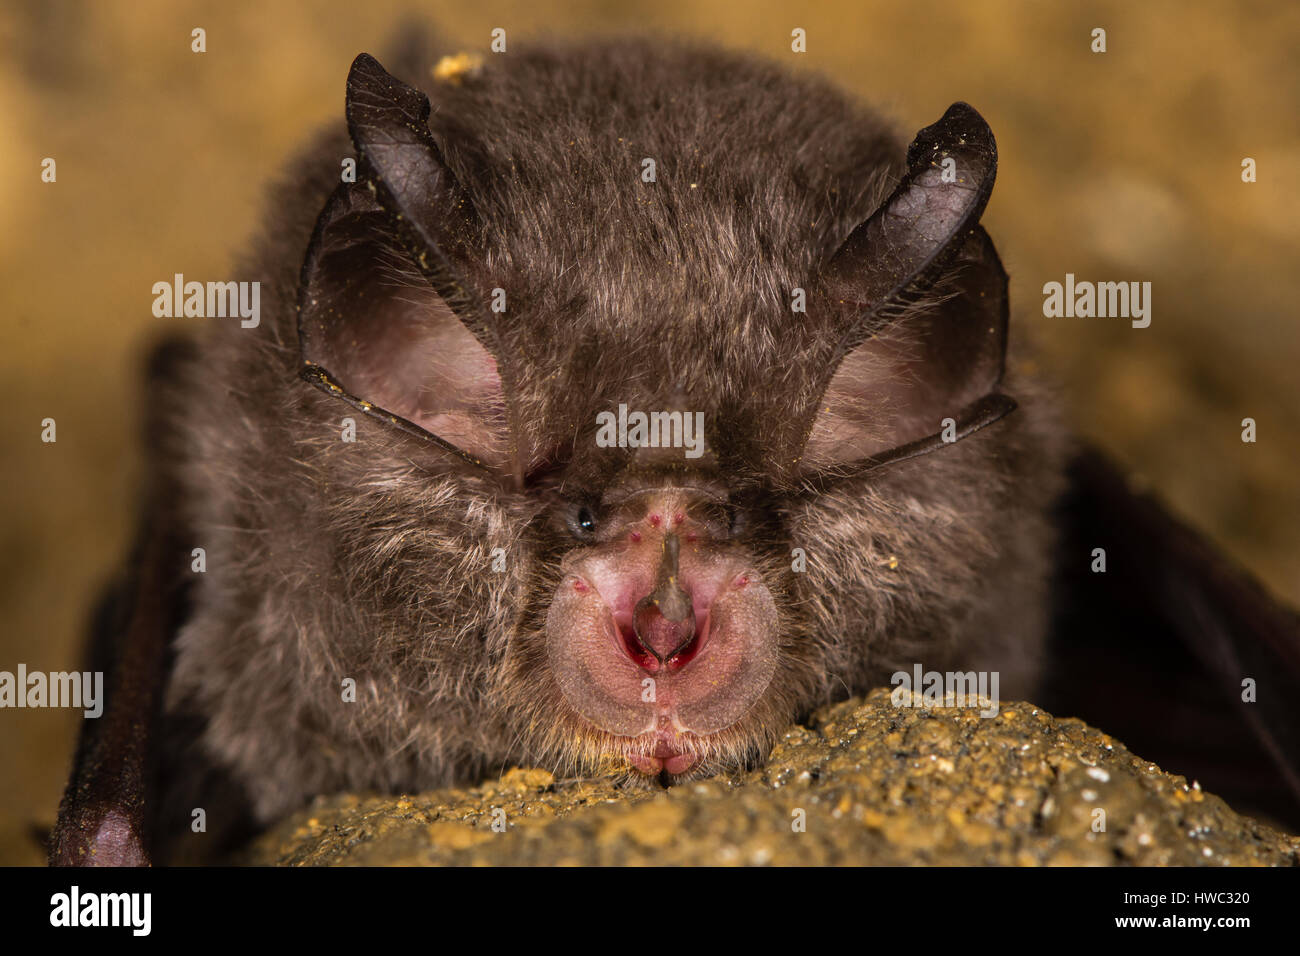 Lesser horseshoe bat (Rhinolophus hipposideros) nose and face. Specialised anatomical features involved in echolocation seen on rare bat Stock Photo